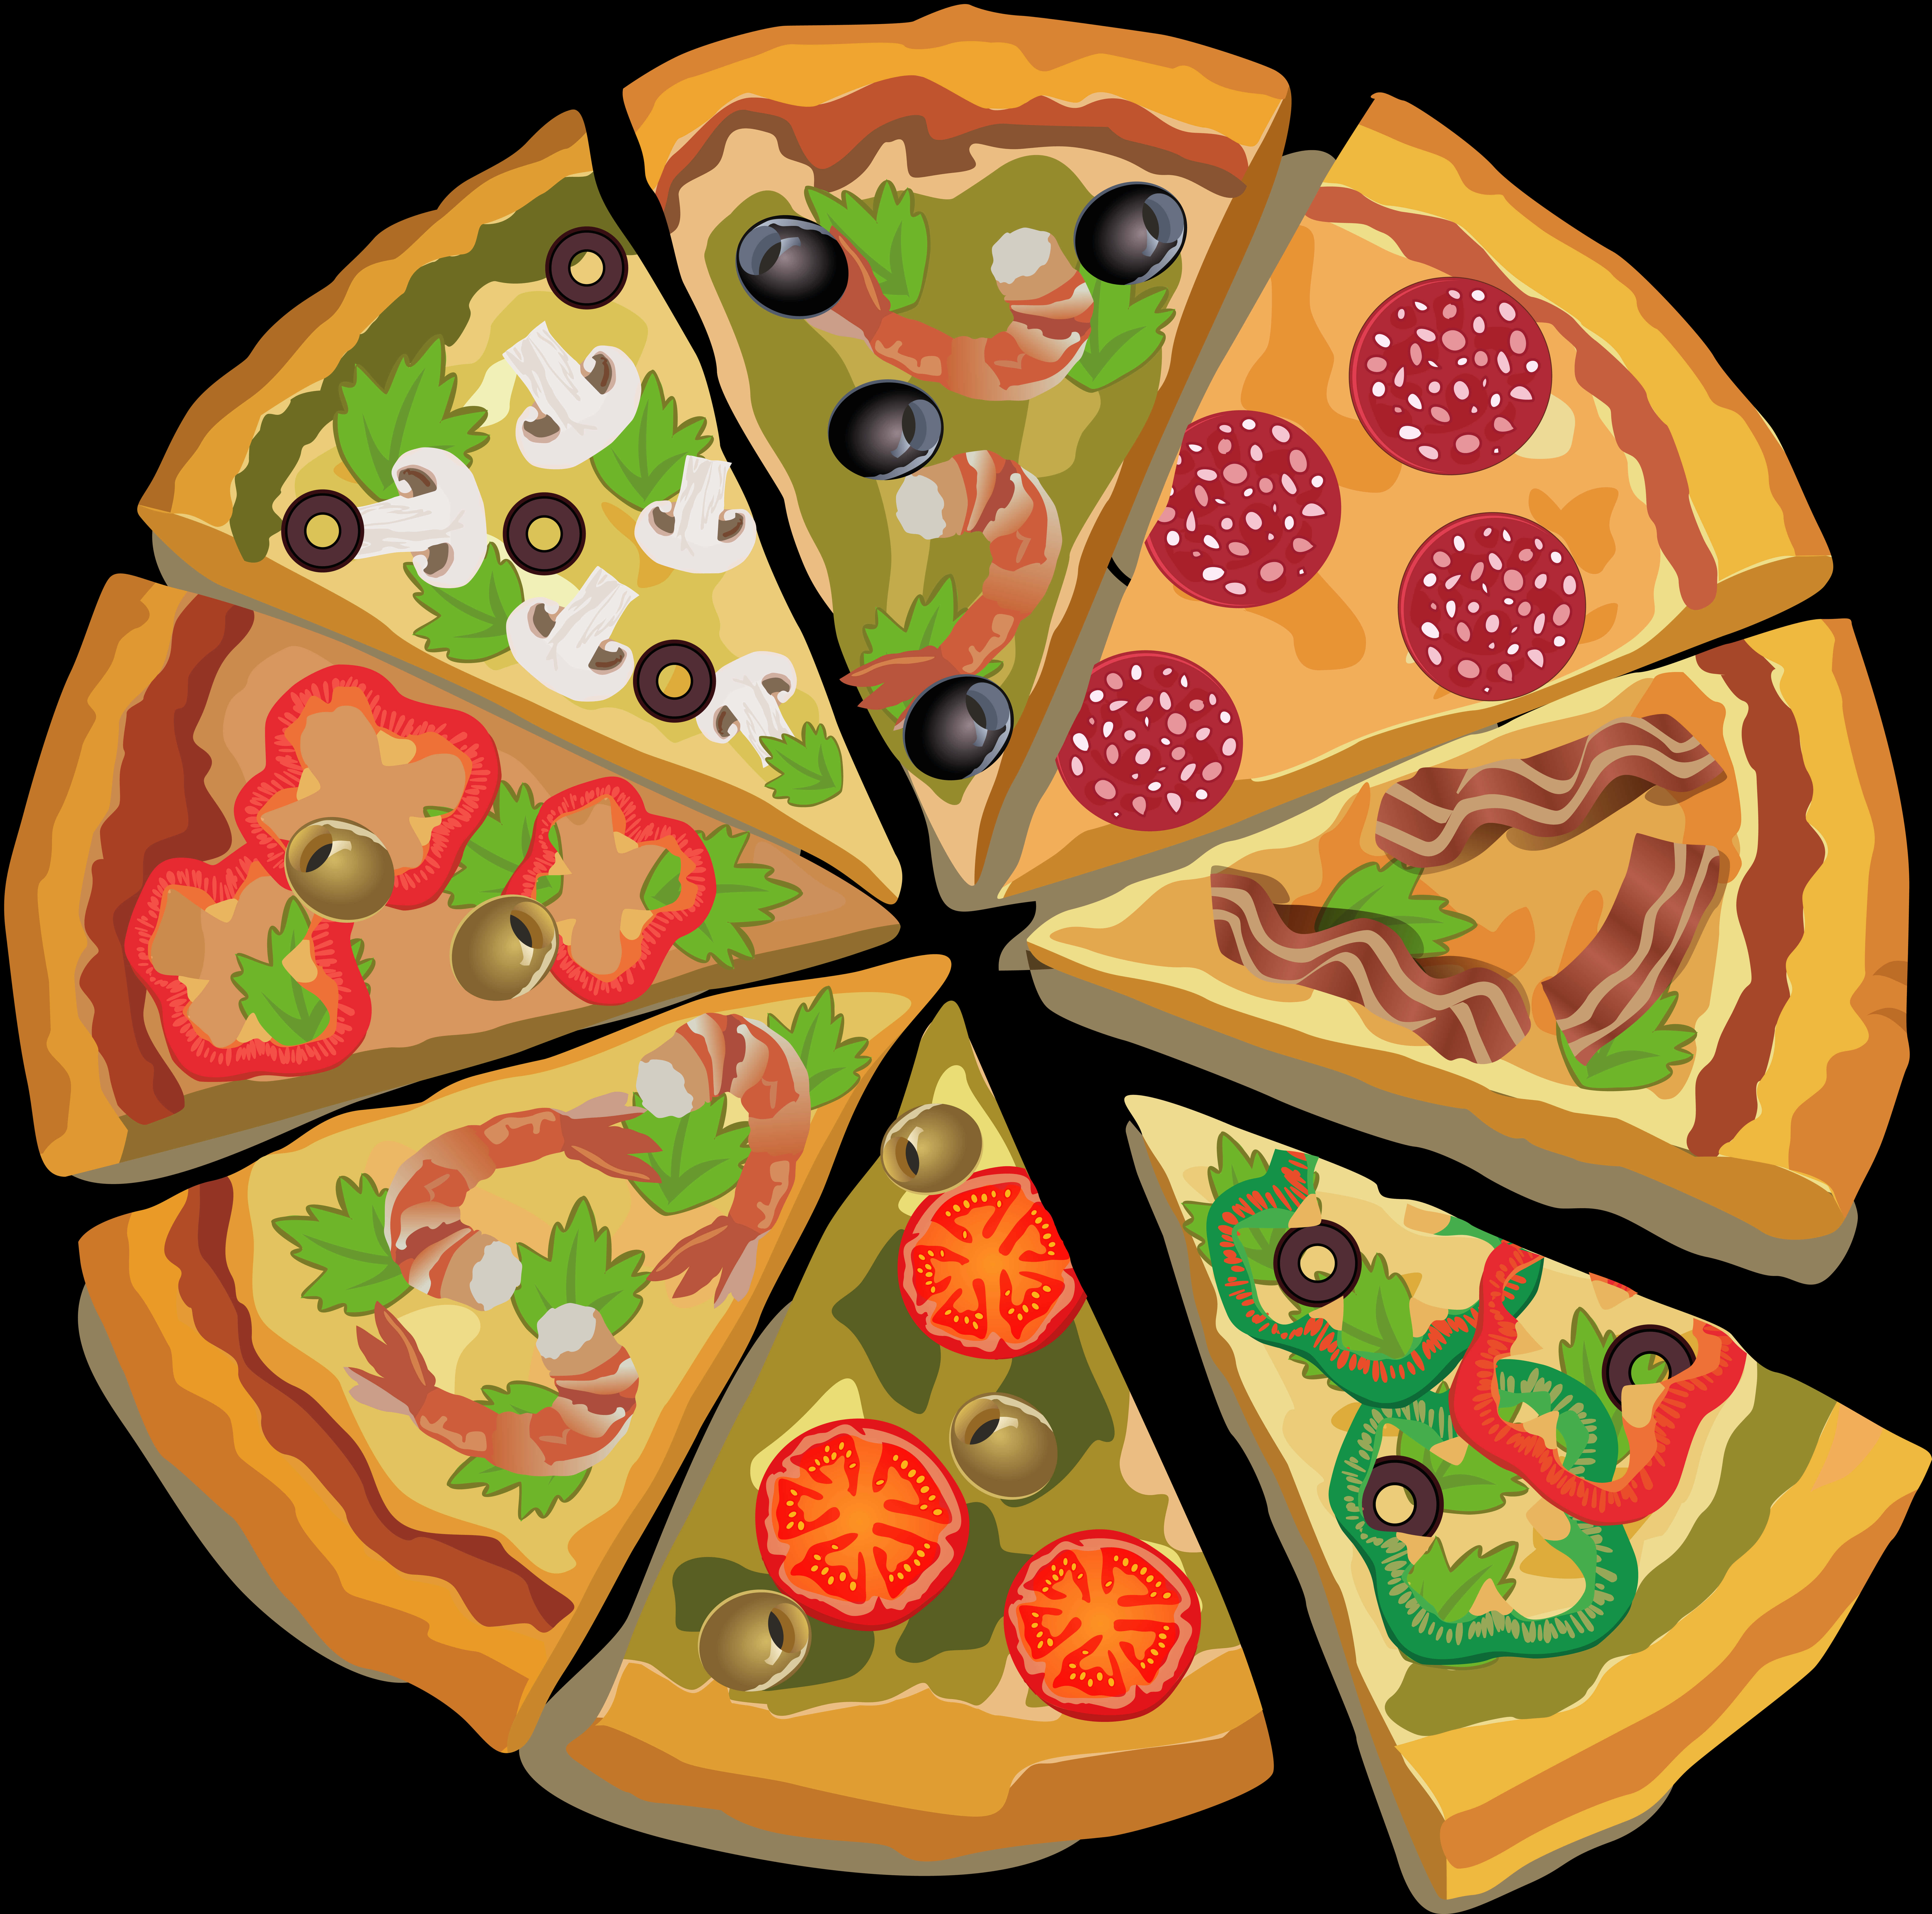 Different Flavors Of Pizza Slices